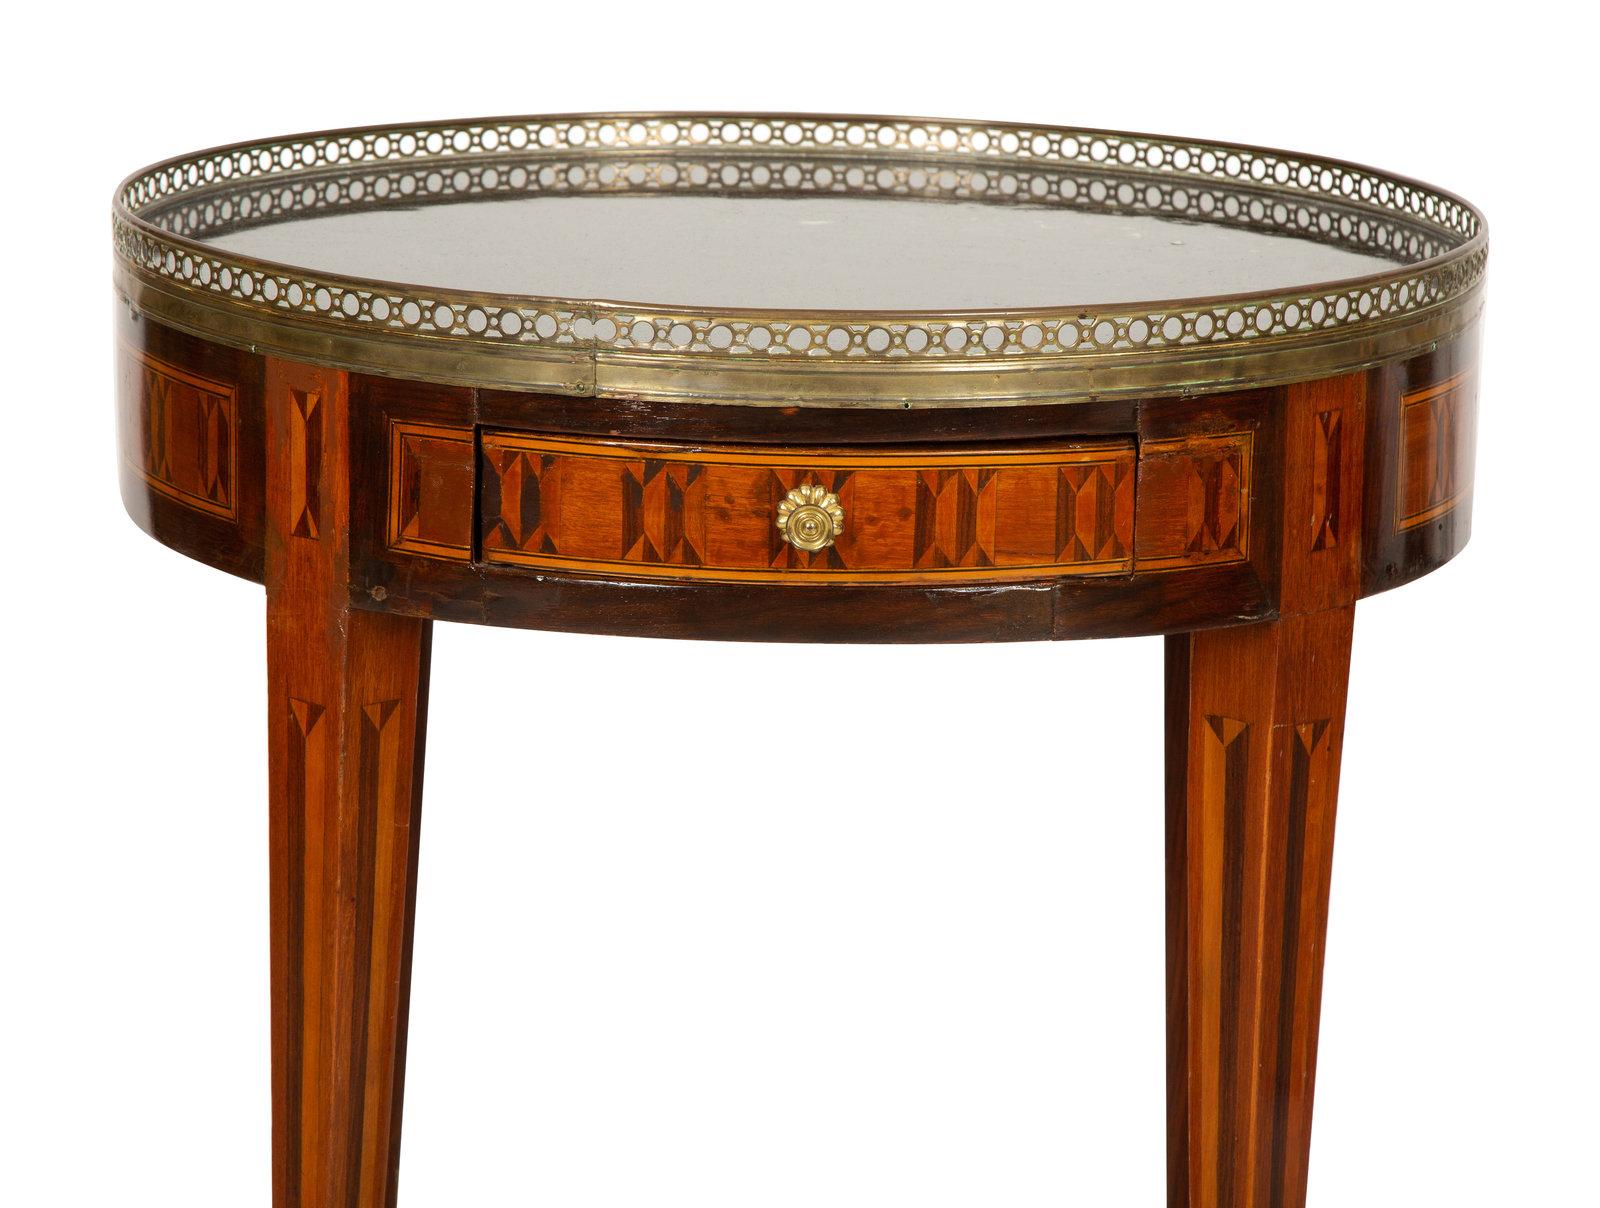 French Louis XVI Style Marquetry Marble-Top Gueridon with a Gallery, Early 20th Century